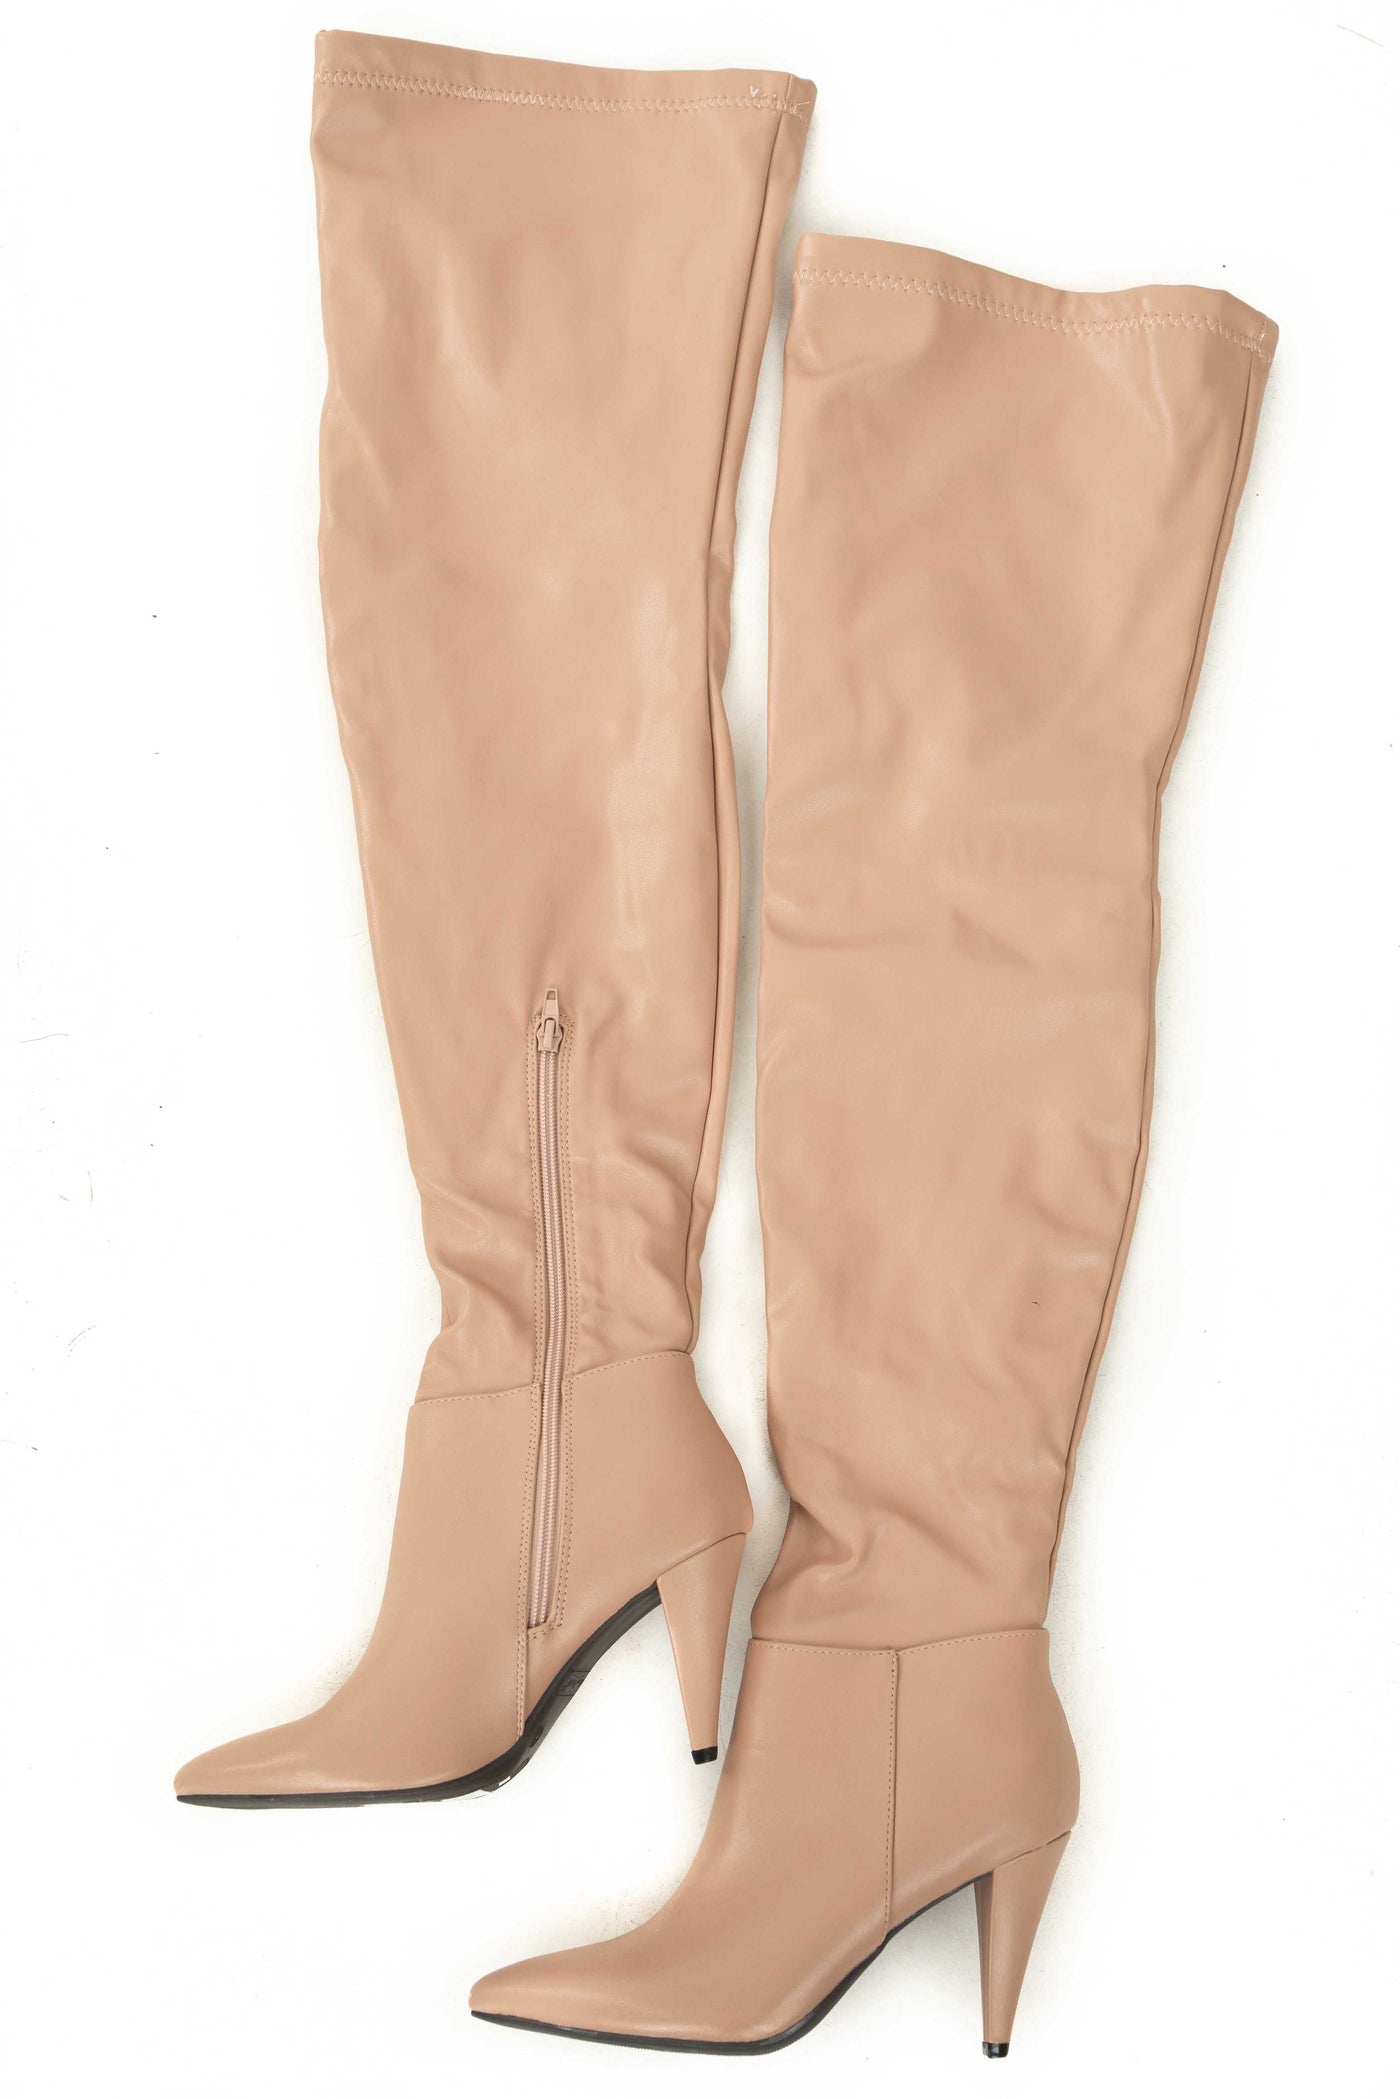 Nude Faux Leather Thigh High Pointed Heel Boots